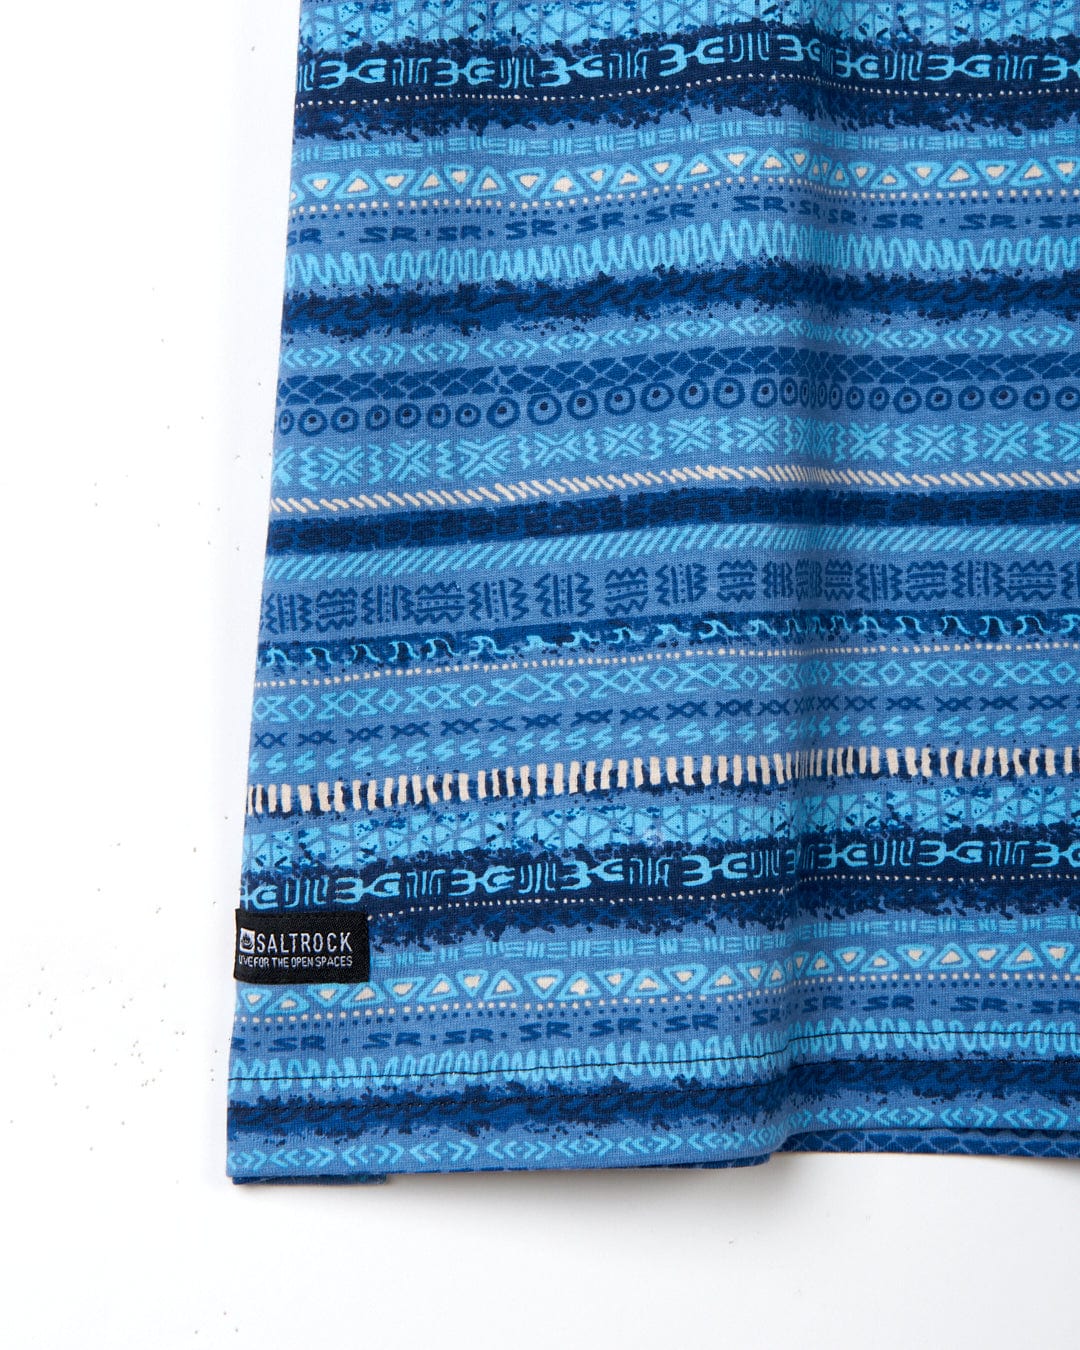 A blue cotton towel with an Aztec print from Saltrock.